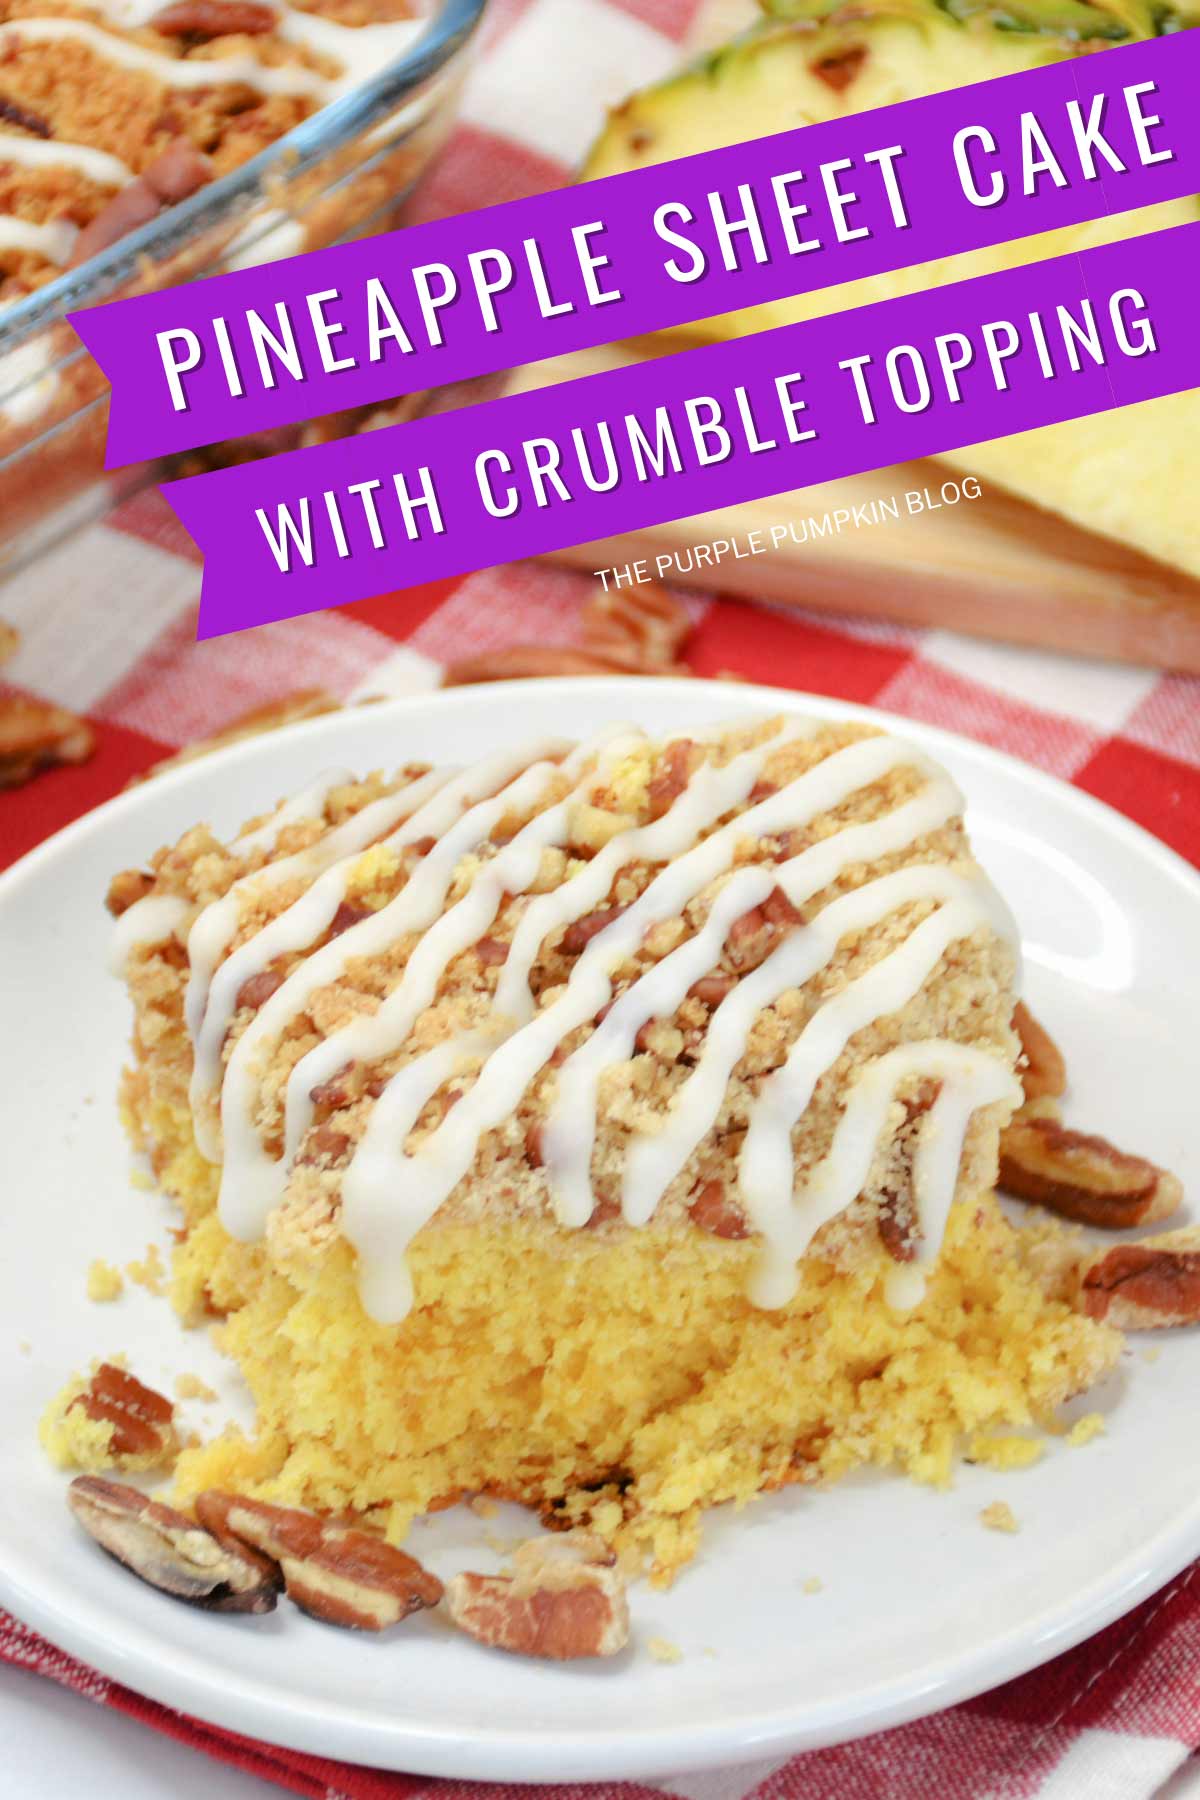 Pineapple-Sheet-Cake-with-Crumble-Topping